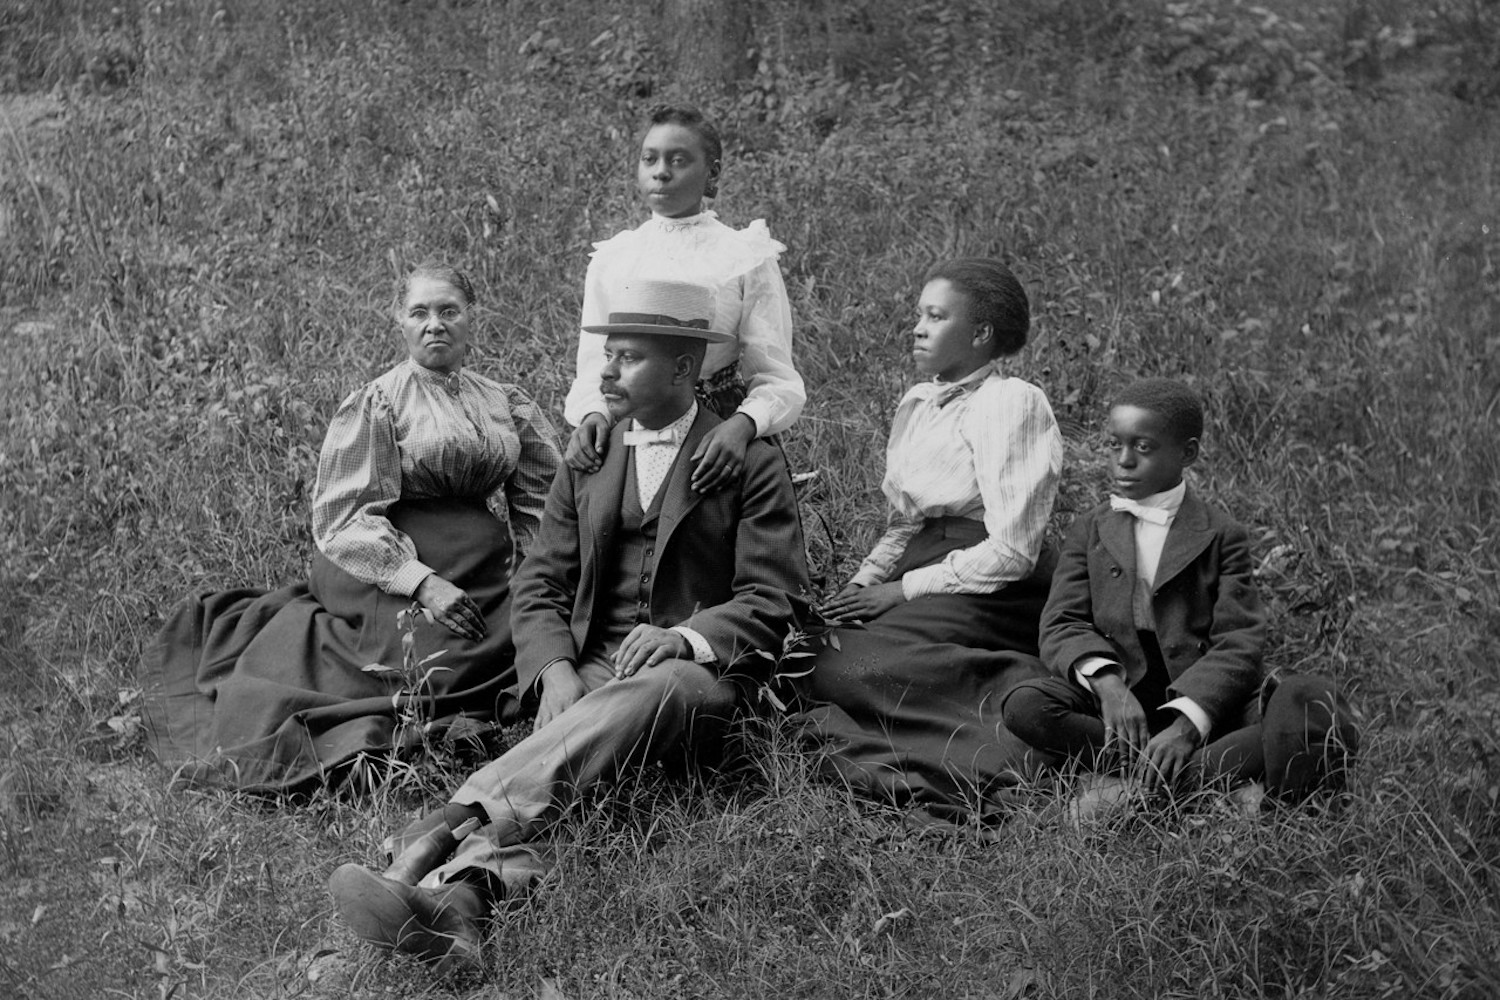 The Names of 1.8 Million Emancipated Slaves Are Now Searchable in the World’s Largest Genealogical Database, Helping African Americans Find Lost Ancestors | Open Culture